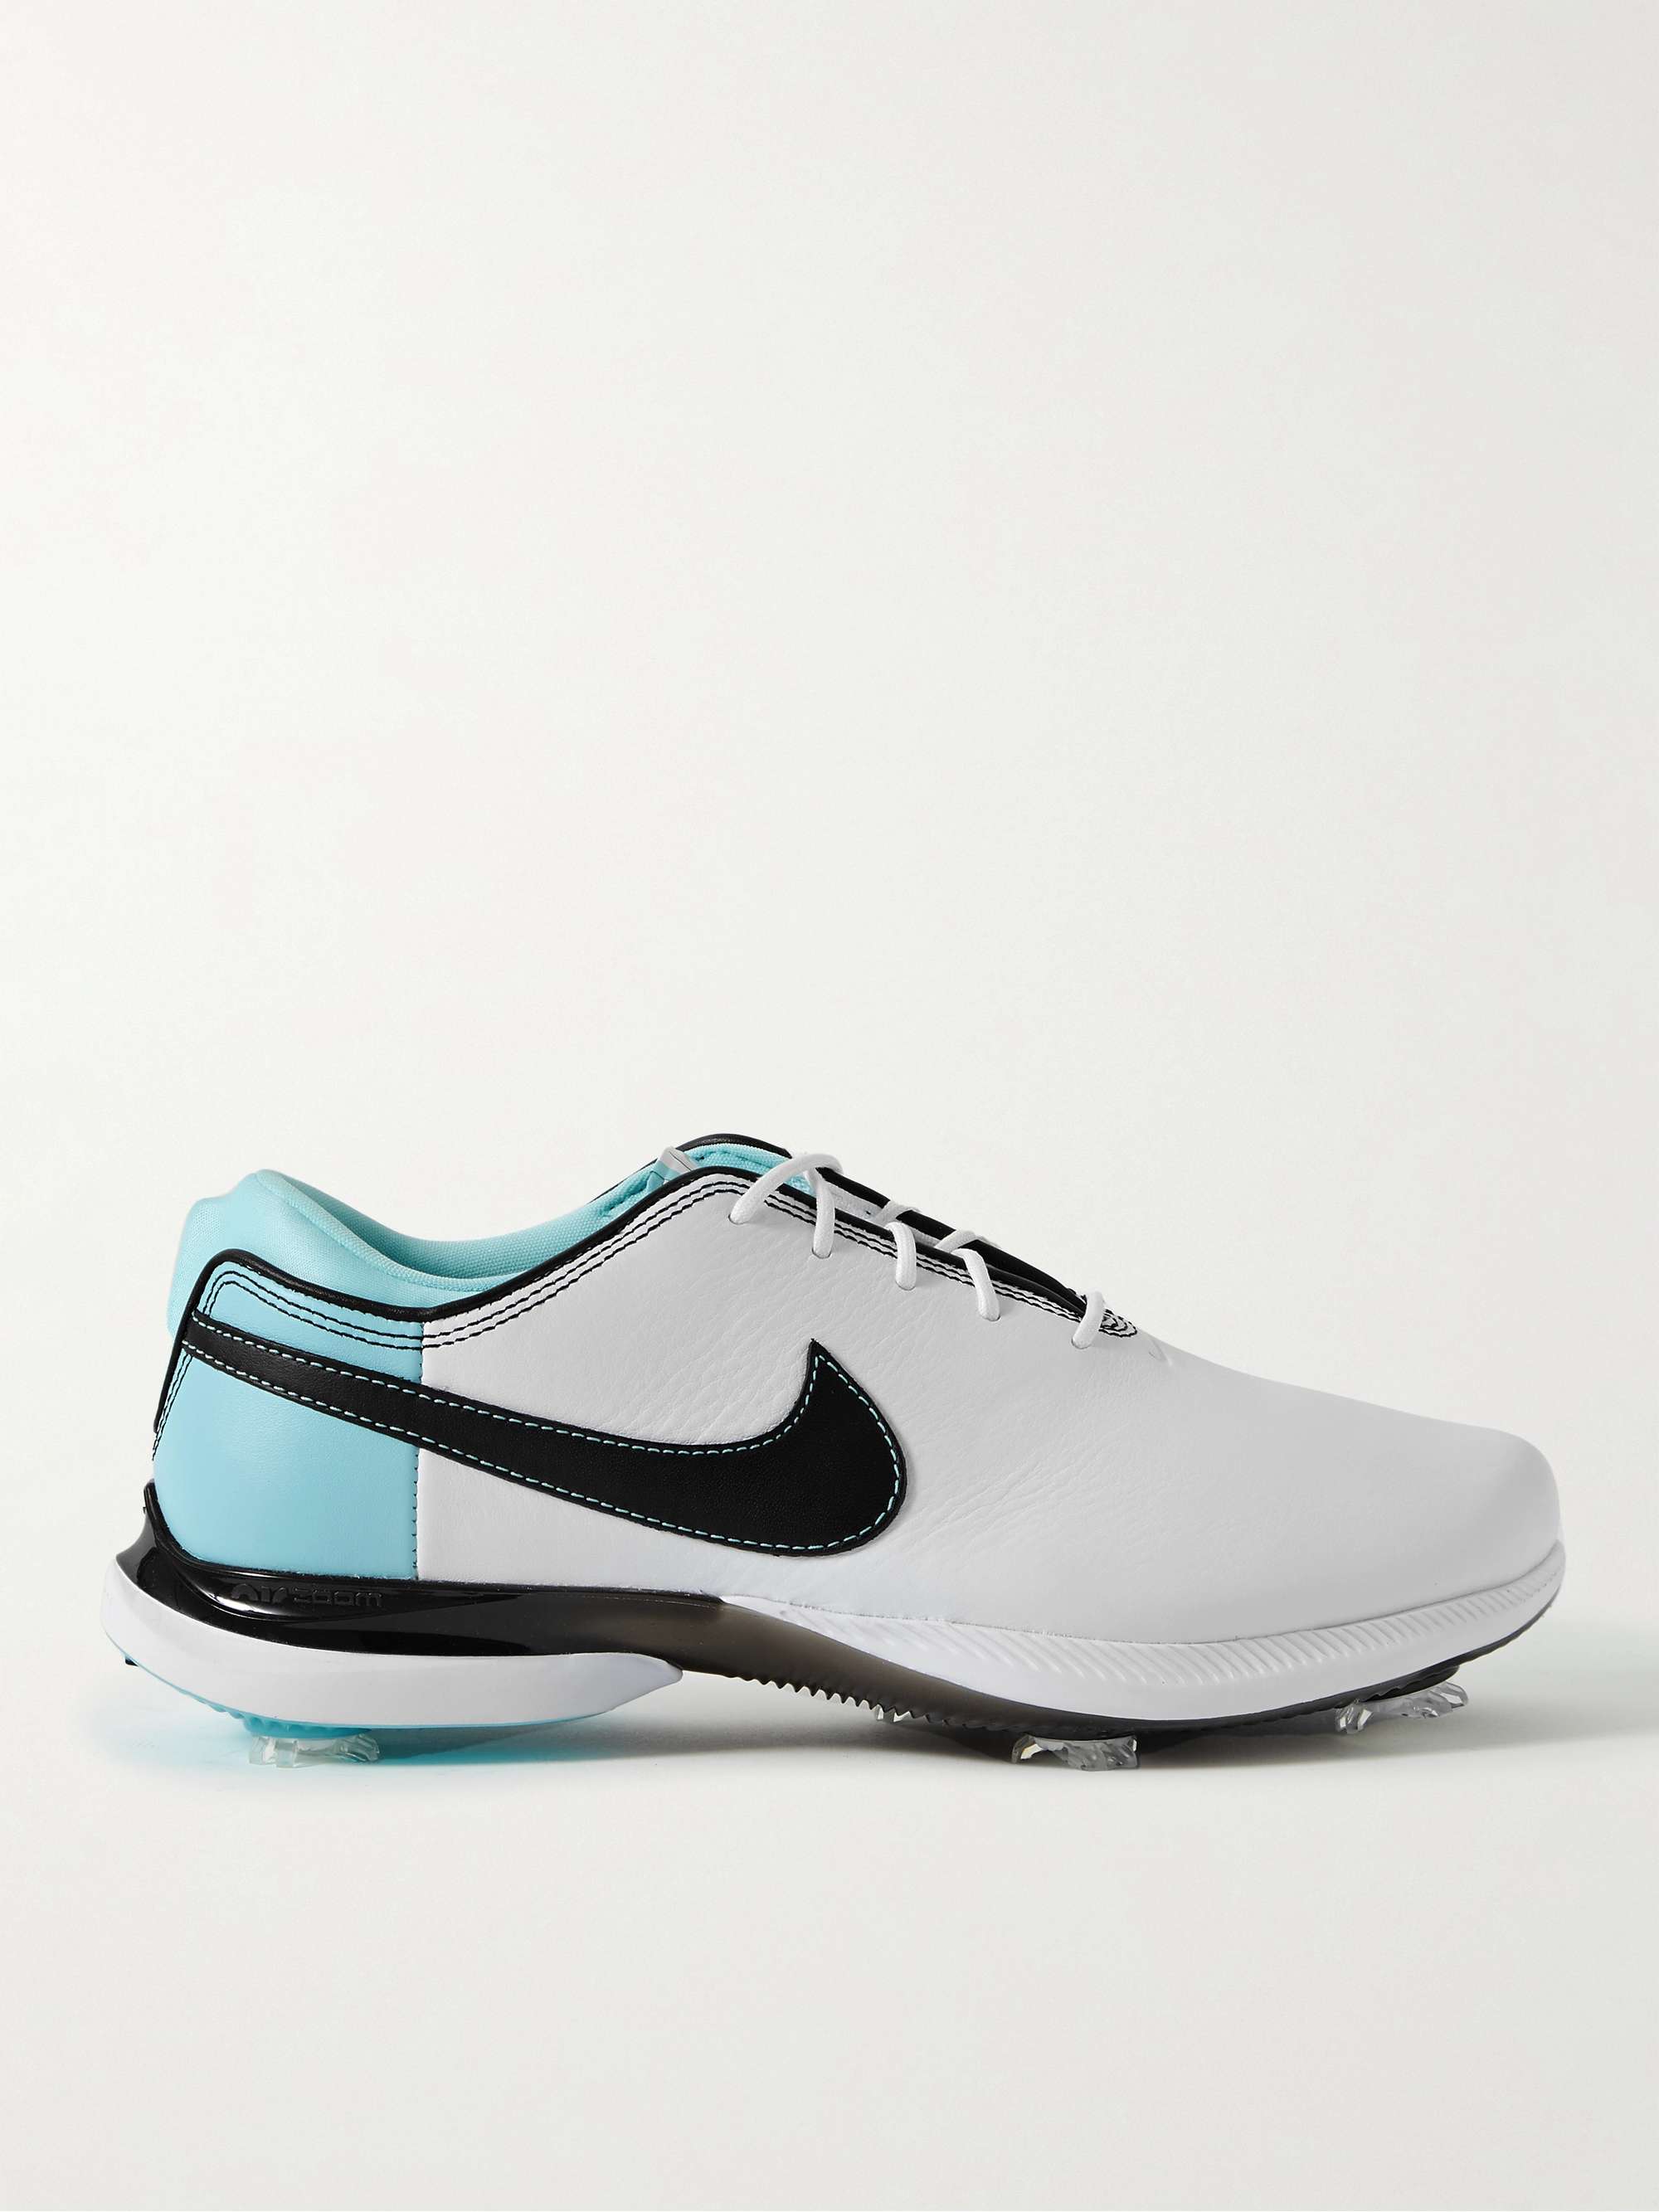 NIKE GOLF Air Zoom Victory Tour 2 Leather Golf Shoes | MR PORTER